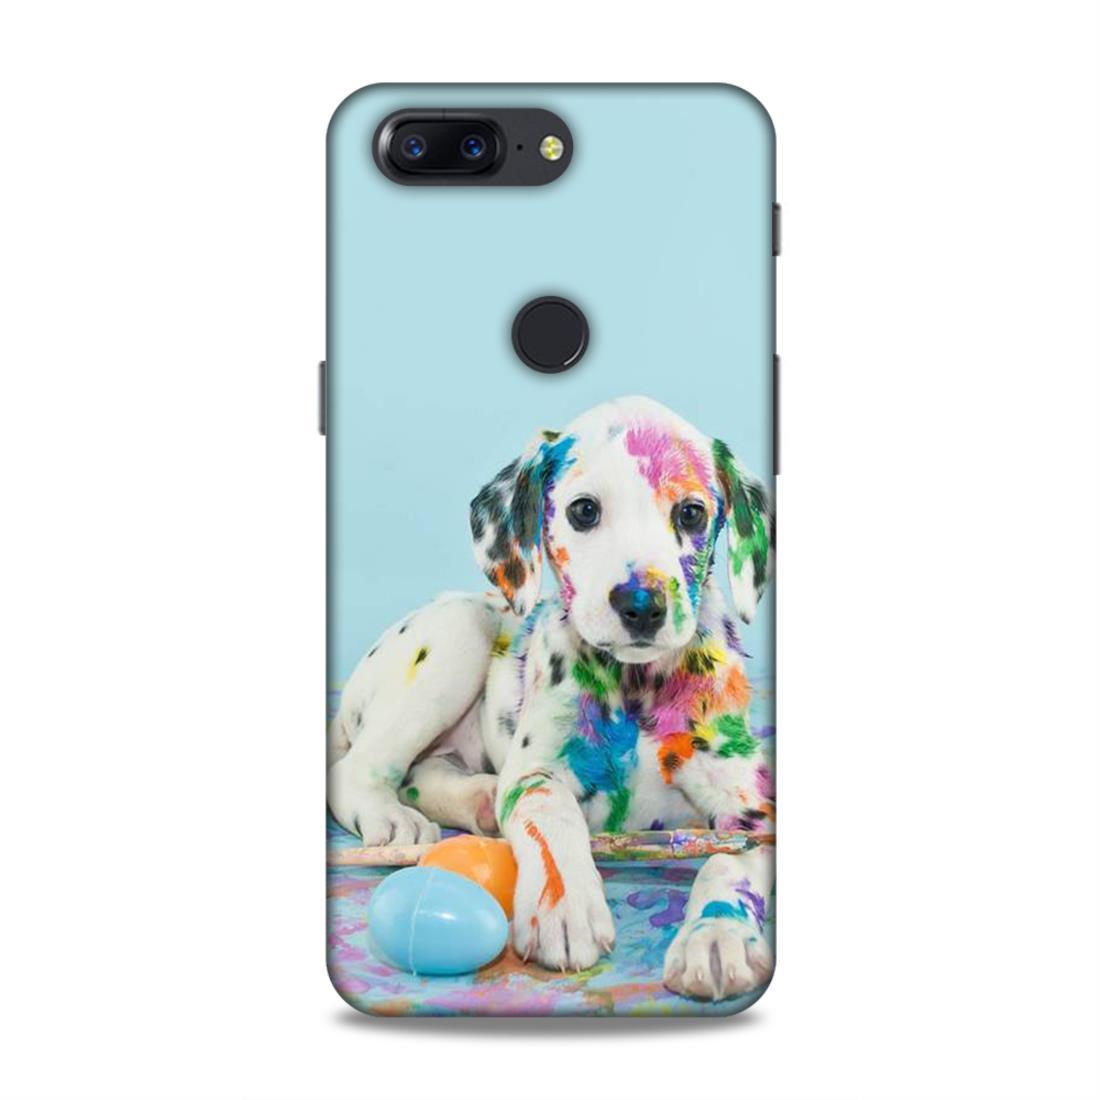 Cute Dog Lover OnePlus 5T Mobile Case Cover